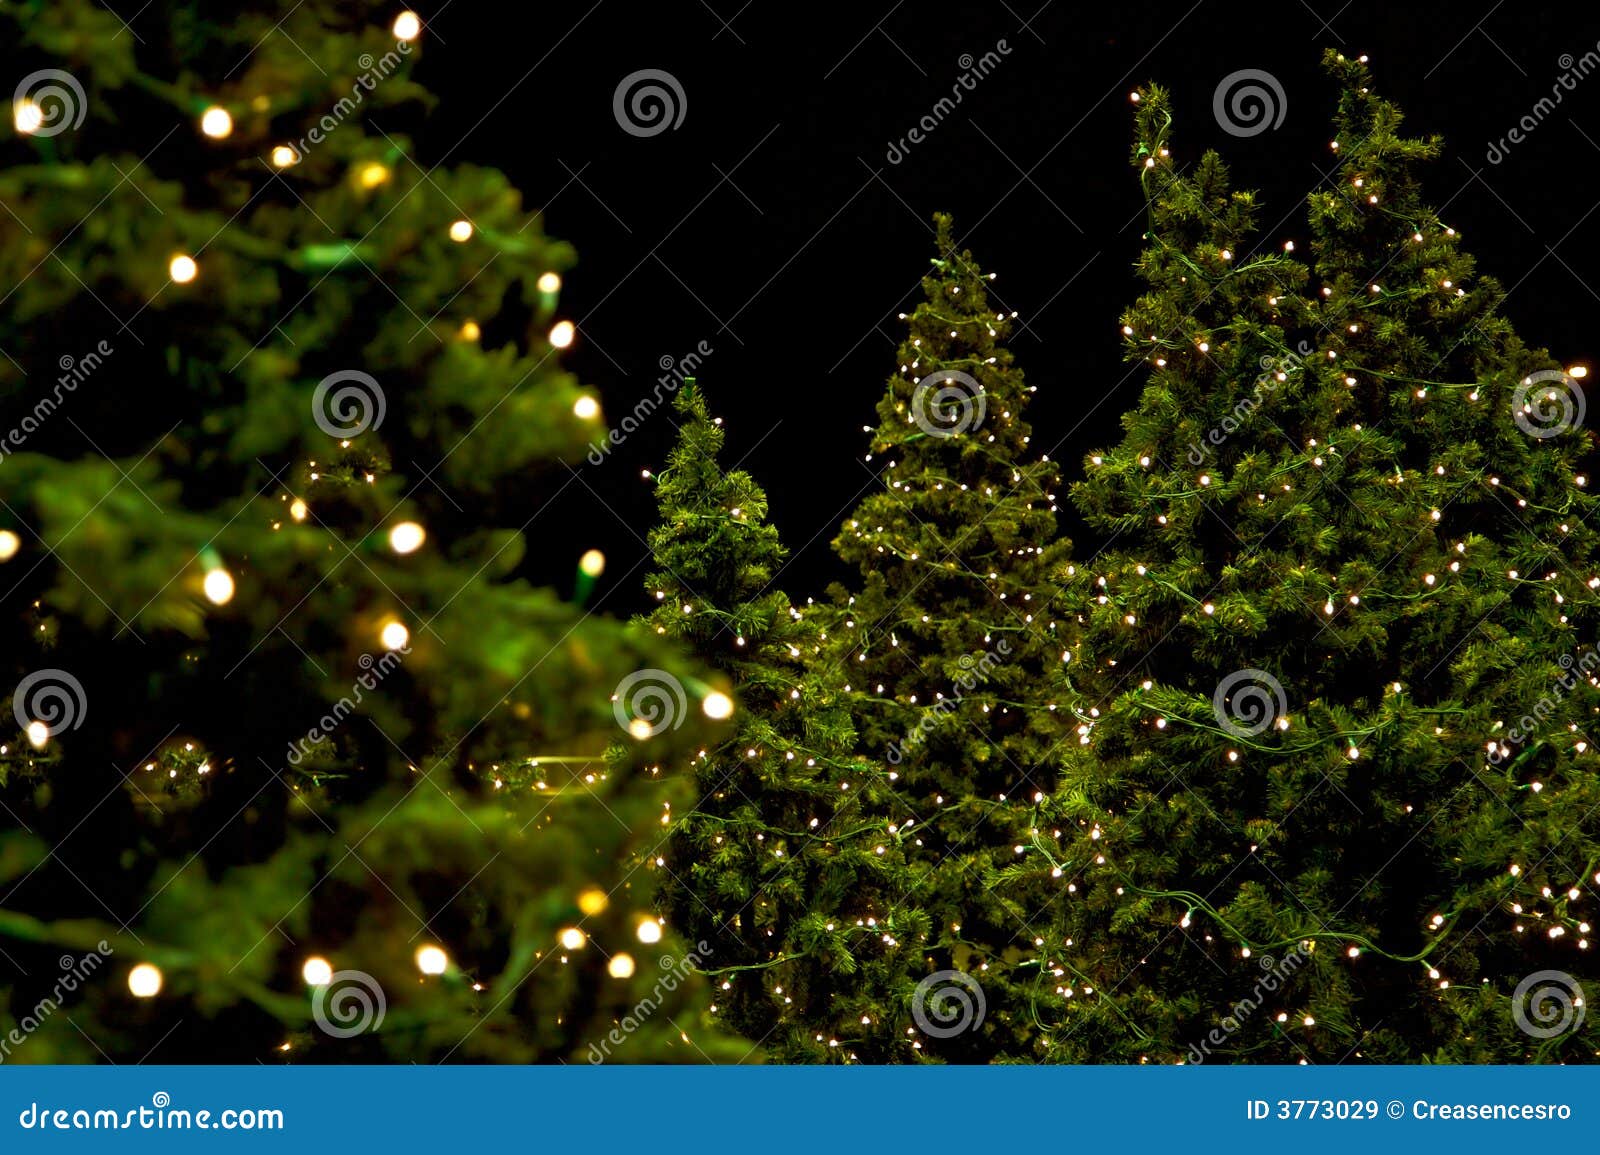 Christmas trees stock image. Image of party, pine, background - 3773029